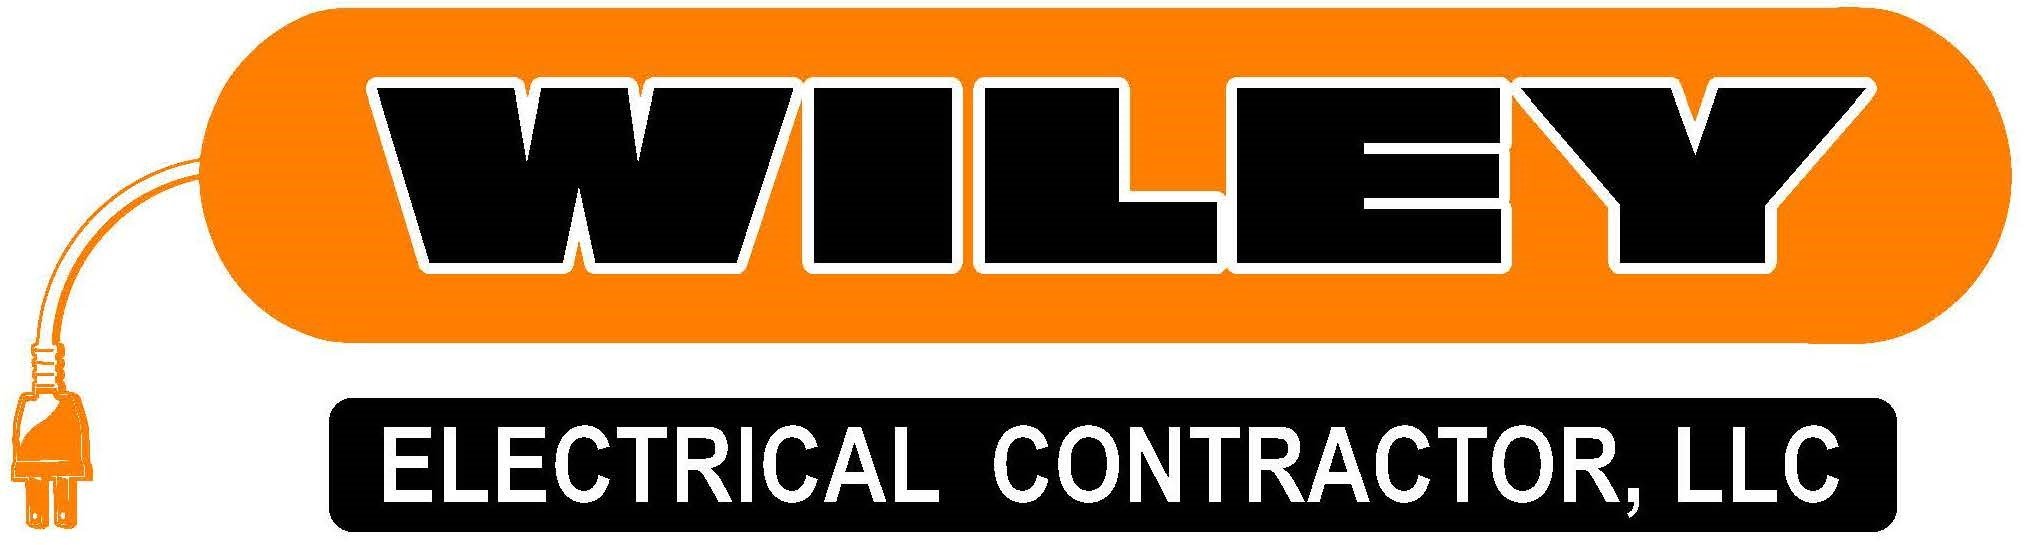 Wiley Electrical Contractor, LLC